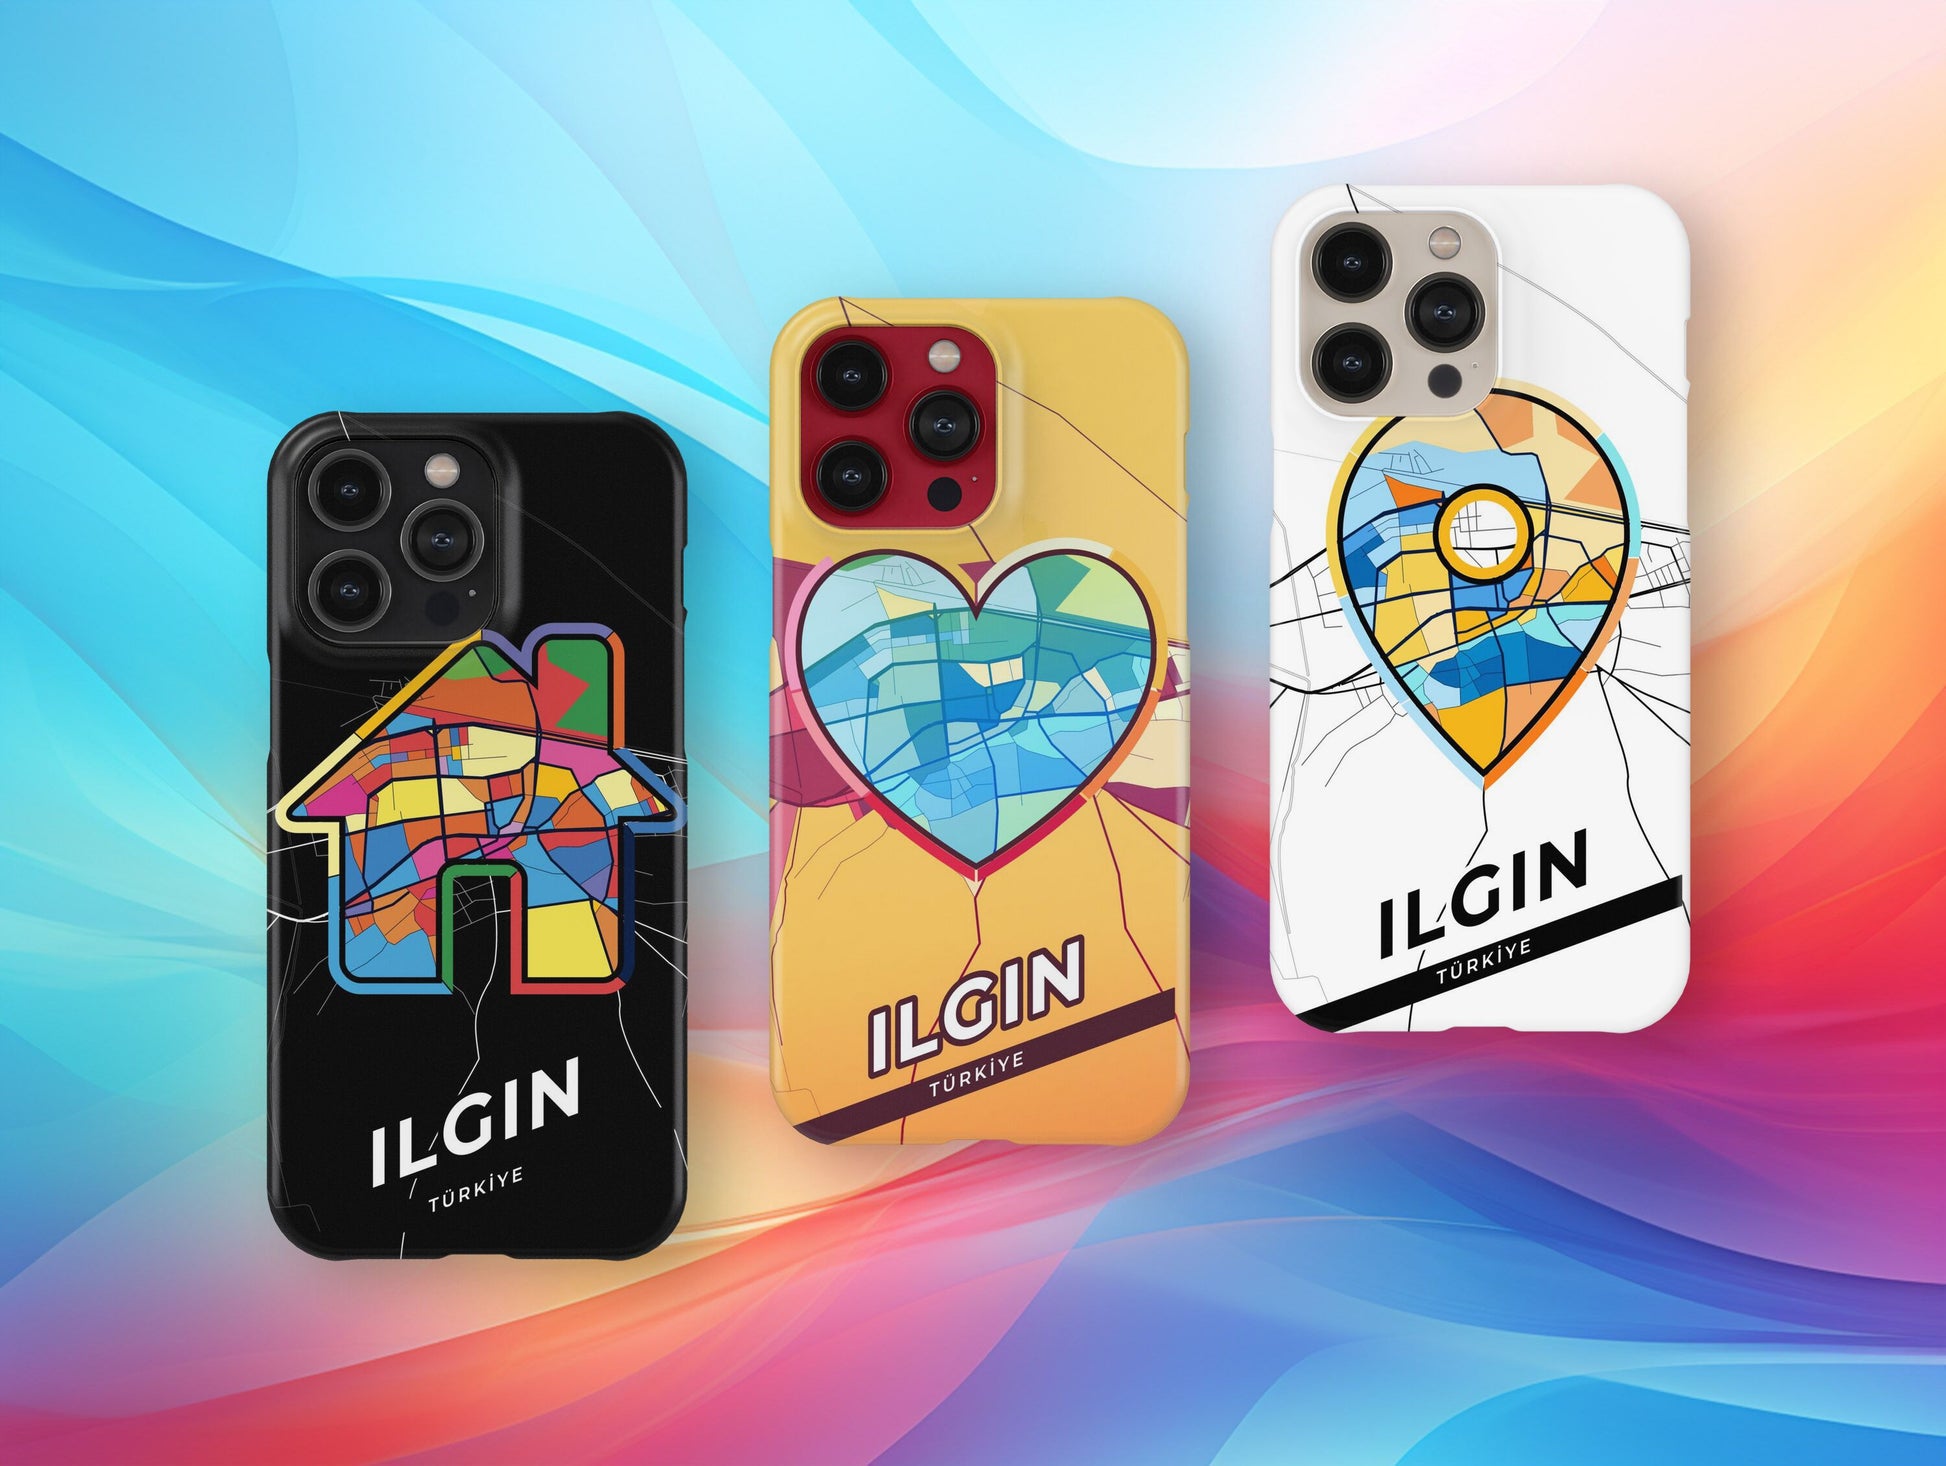 Ilgın Turkey slim phone case with colorful icon. Birthday, wedding or housewarming gift. Couple match cases.